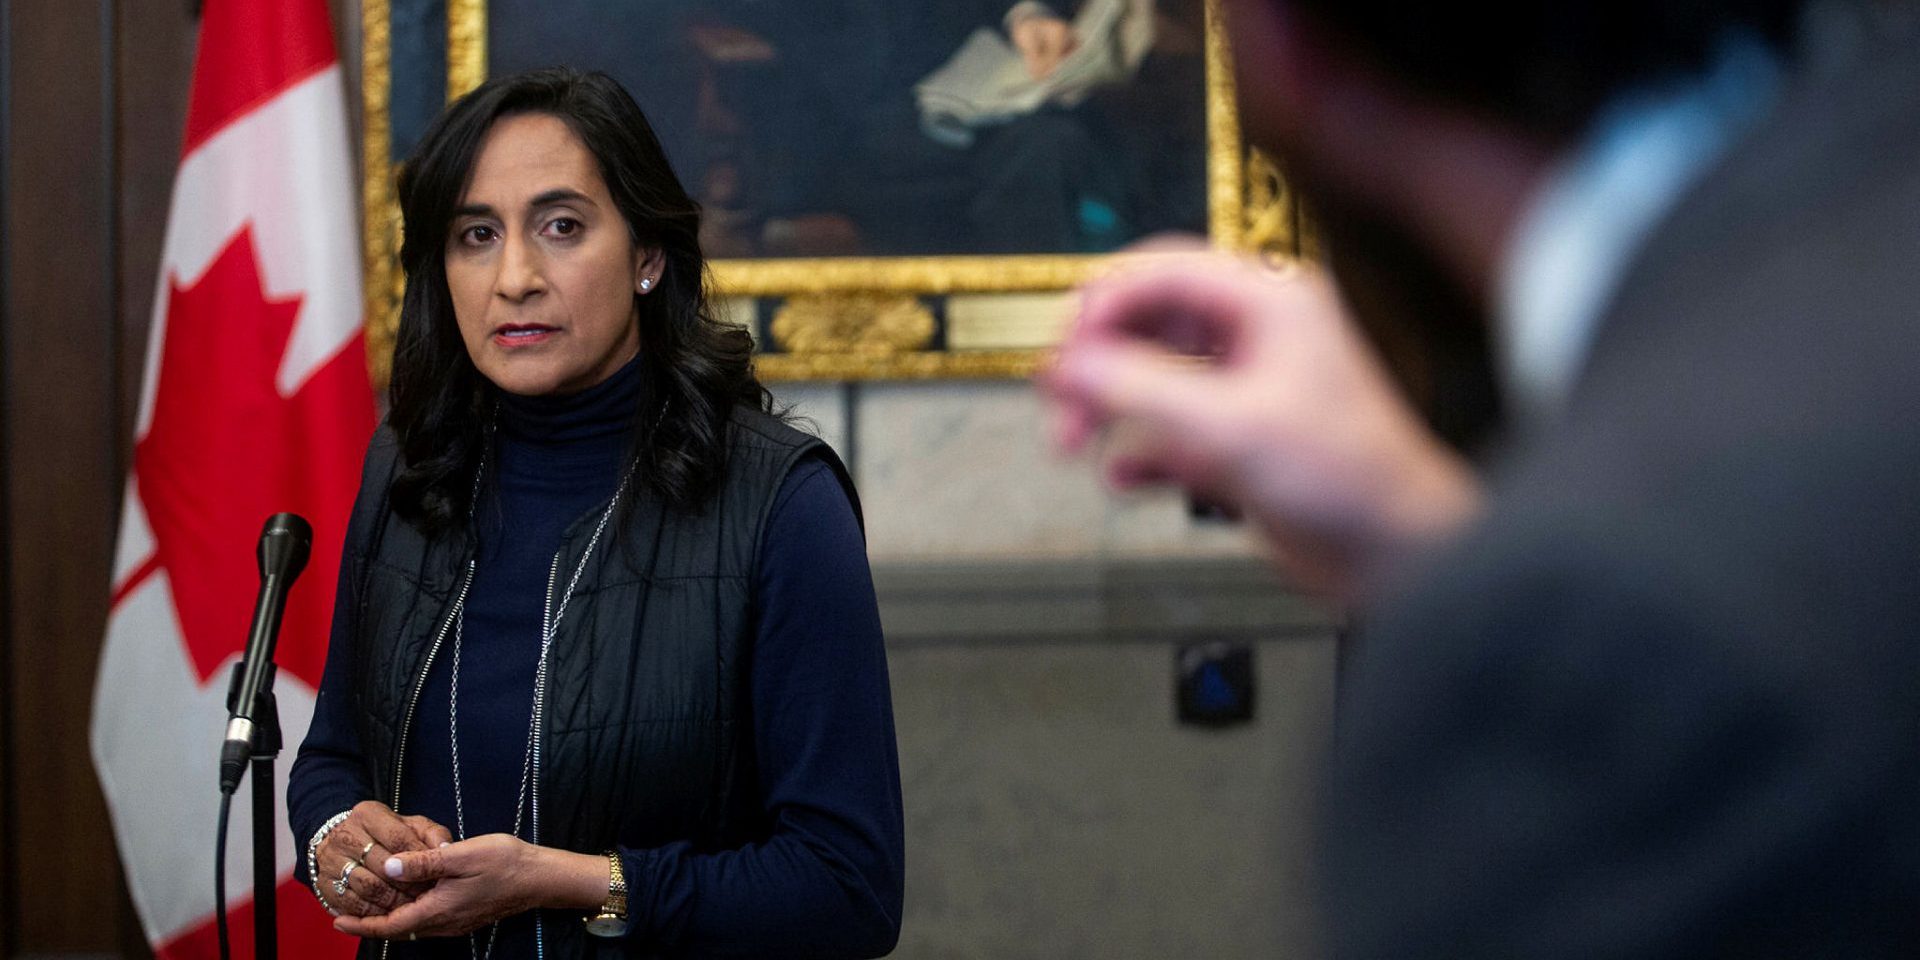 Minister of National Defence Anita Anand takes questions from reporters outside the House of Commons before Question Period on  Oct. 24, 2022. The Hill Times photograph by Andrew Meade